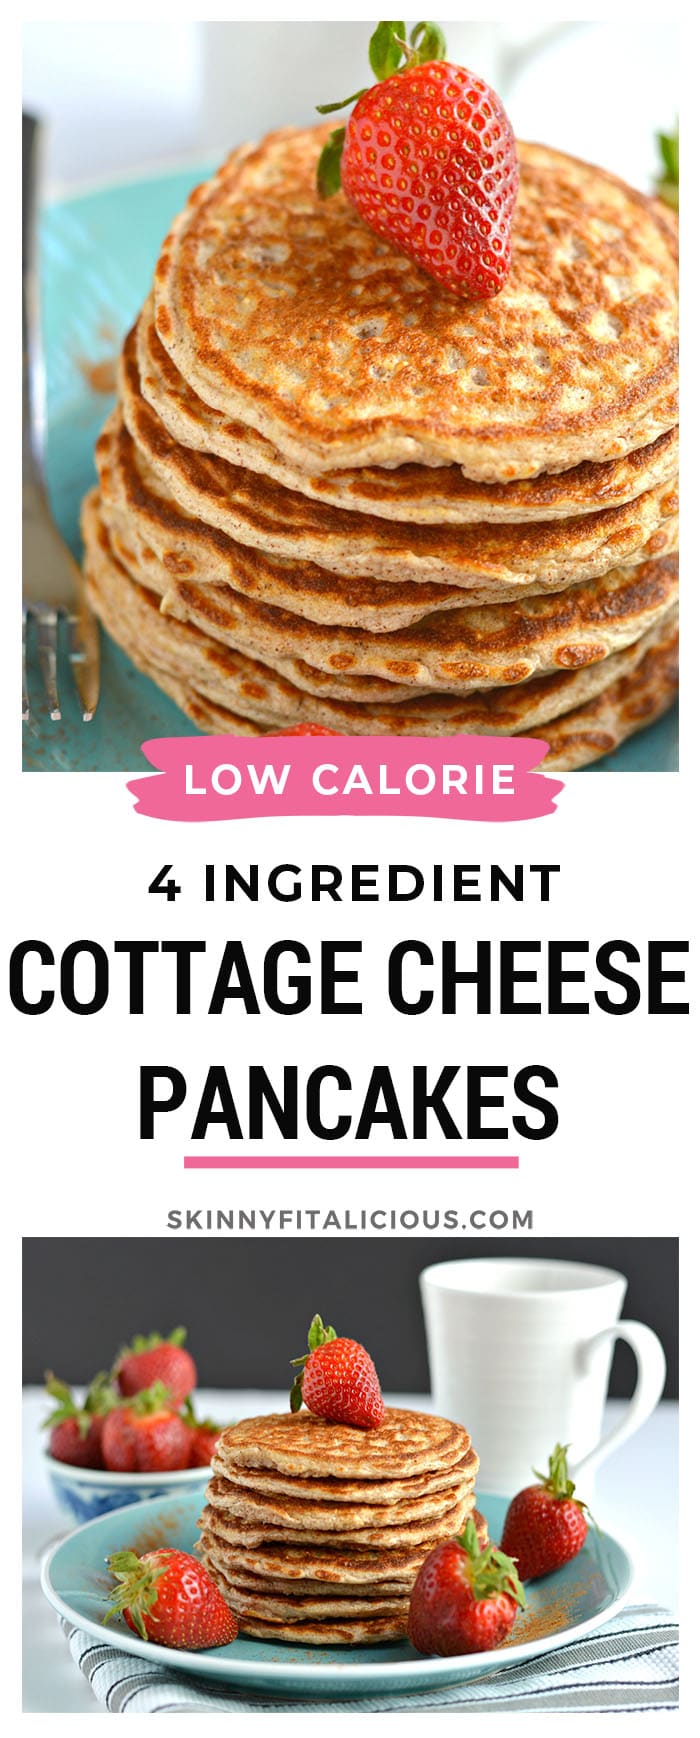 Cottage Cheese Pancakes made with four healthy ingredients and crazy delicious. They're low calorie, gluten free and super simple to make. These protein pancakes are soon to be your new everyday breakfast favorite! Gluten Free + Low Calorie